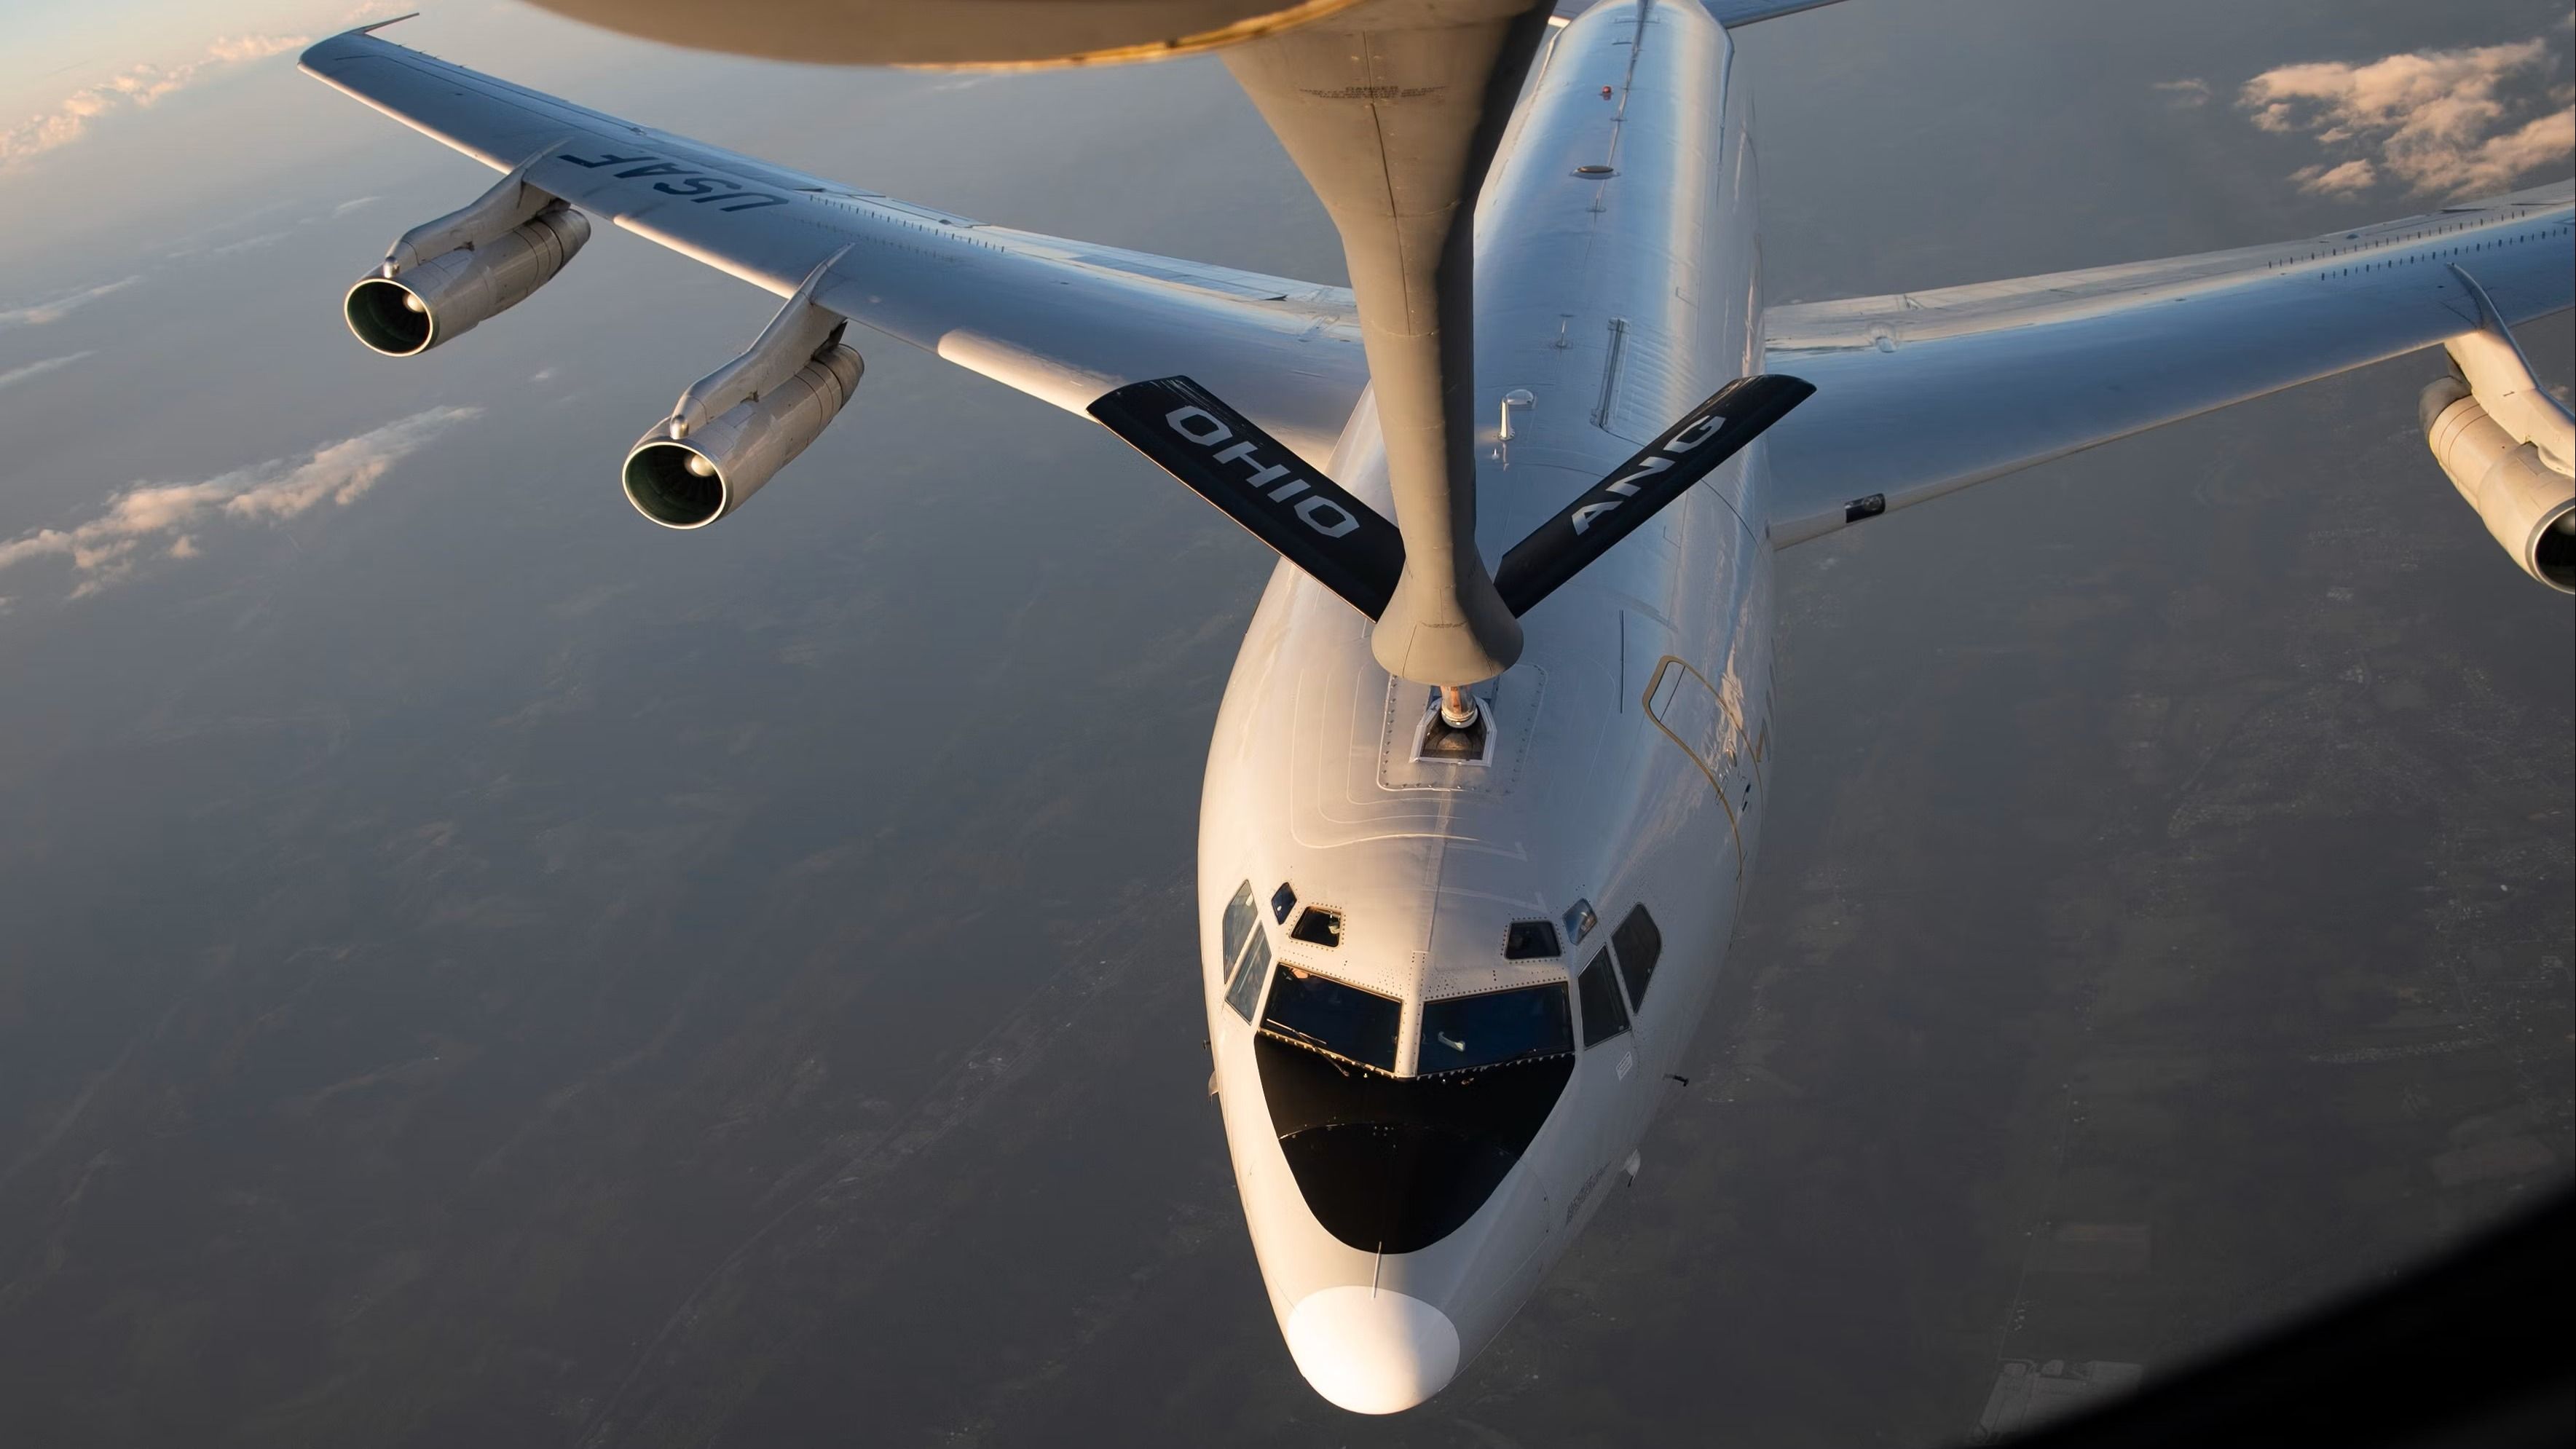 A KC-135 Stratotanker from the 121st Air Refueling Wing refuels an E-8C Joint Surveillance Target Attack Radar System with the 116th Air Control Wing over the skies of North Carolina